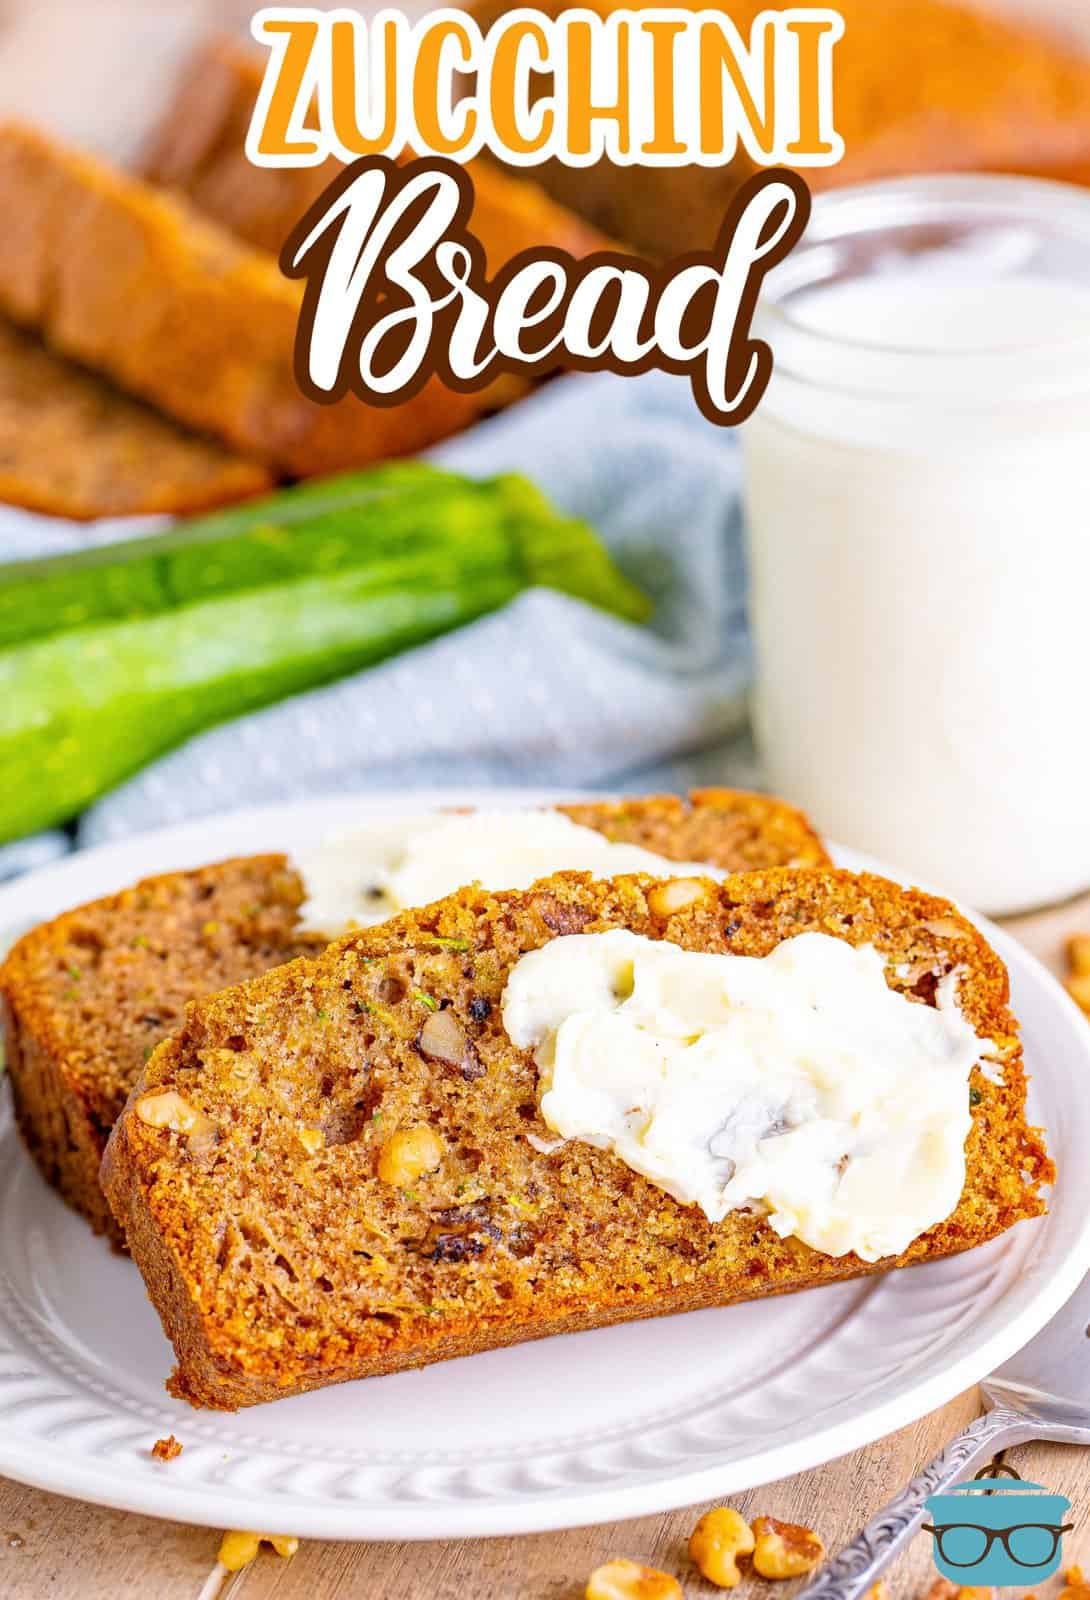 Two slices of Zucchini Bread with a sweet spread on top on a plate.